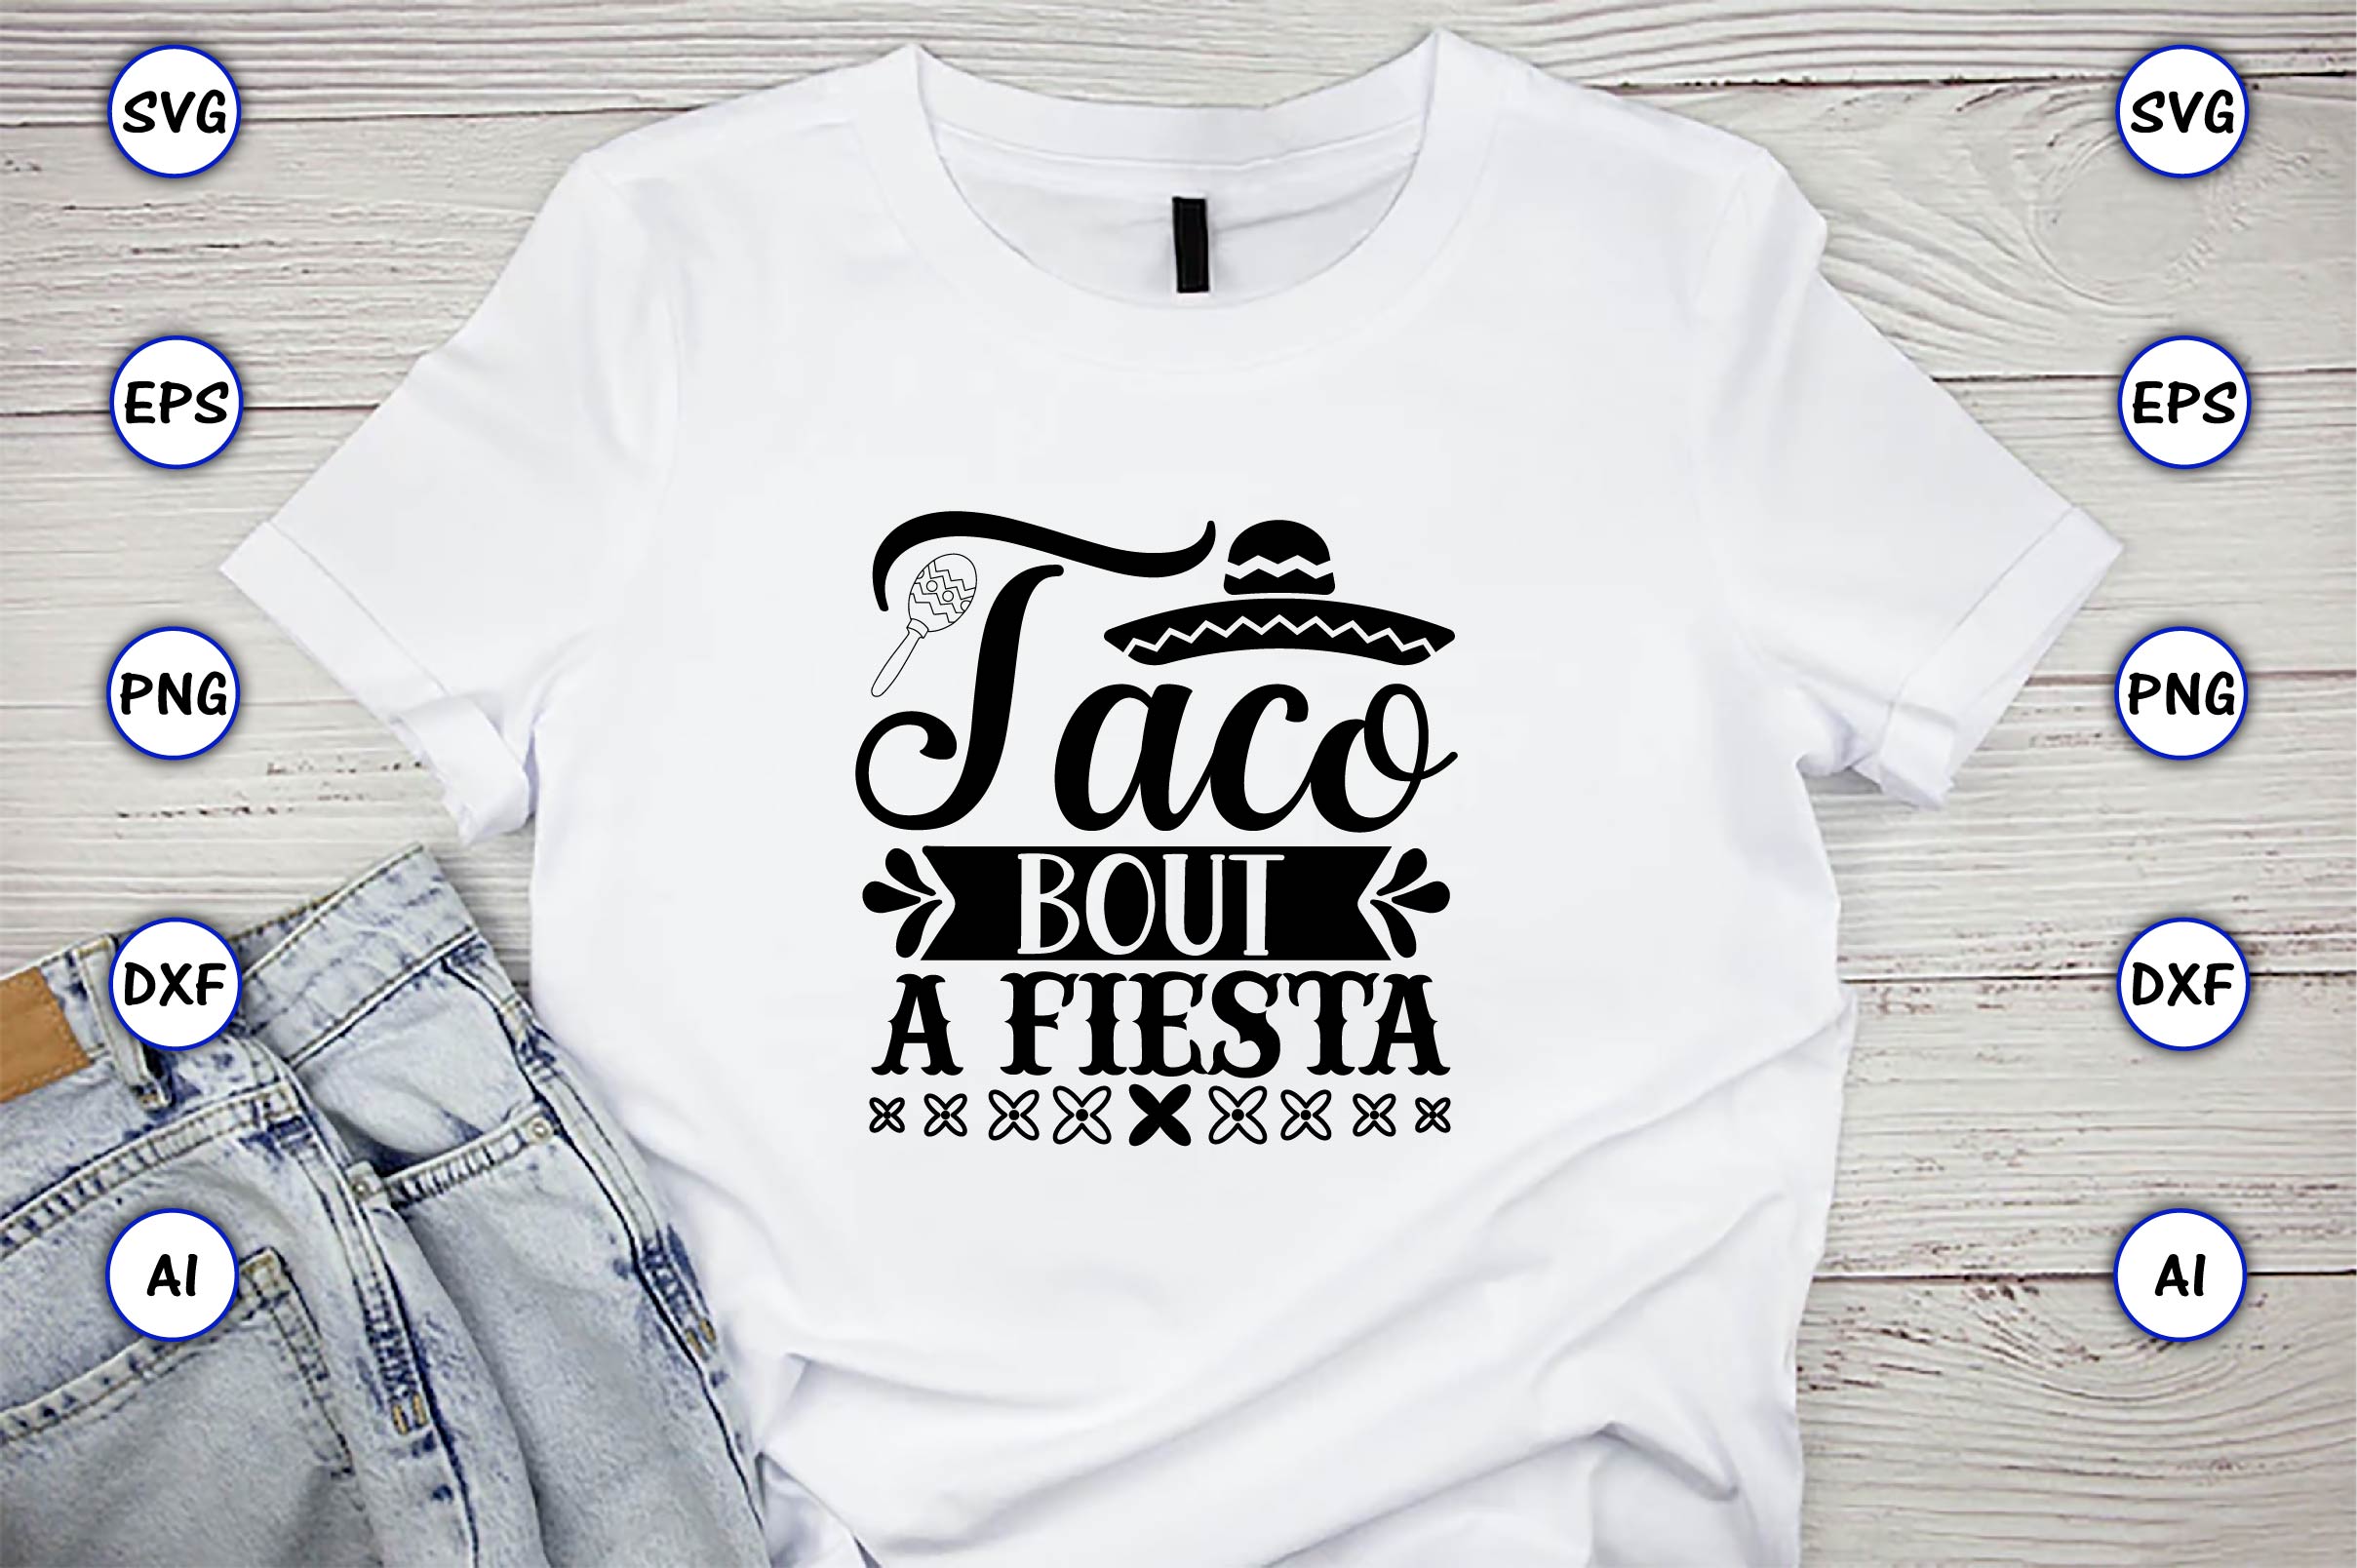 Image of a white t-shirt with amazing Taco bout a fiesta lettering.